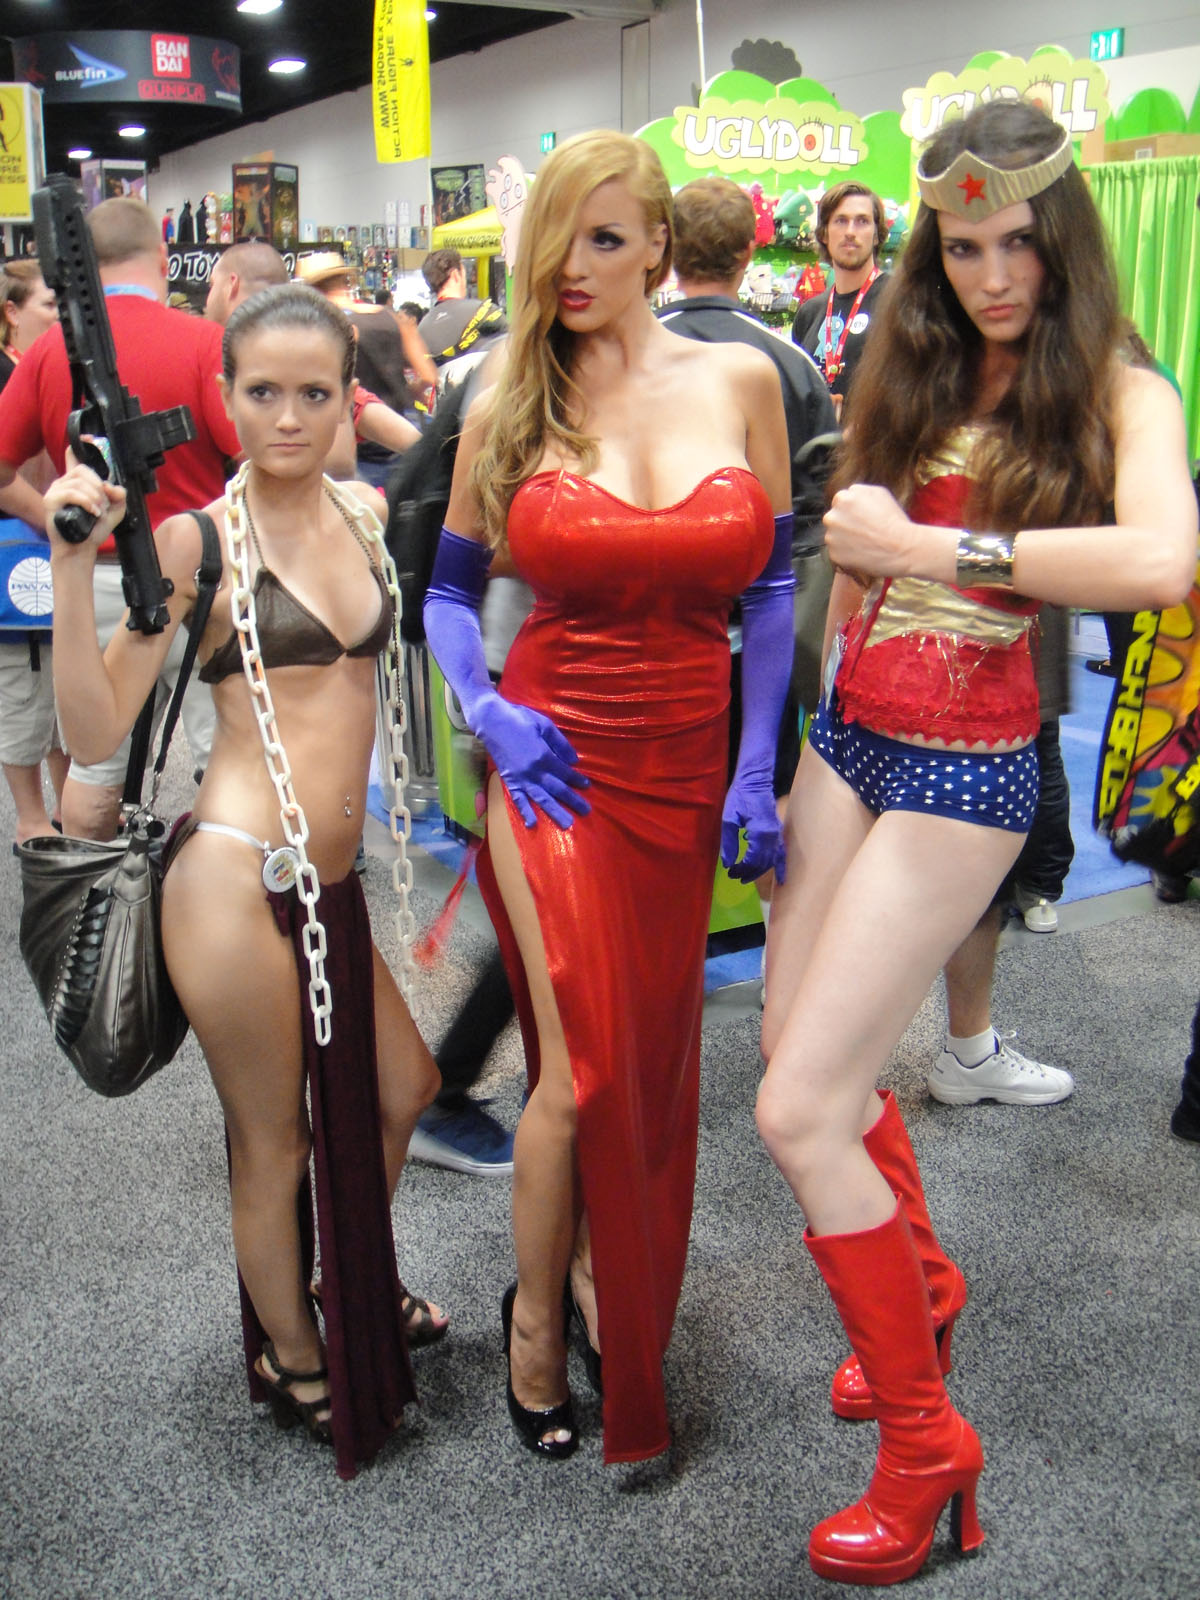 two woman dressed up like bombs and another women in costumes